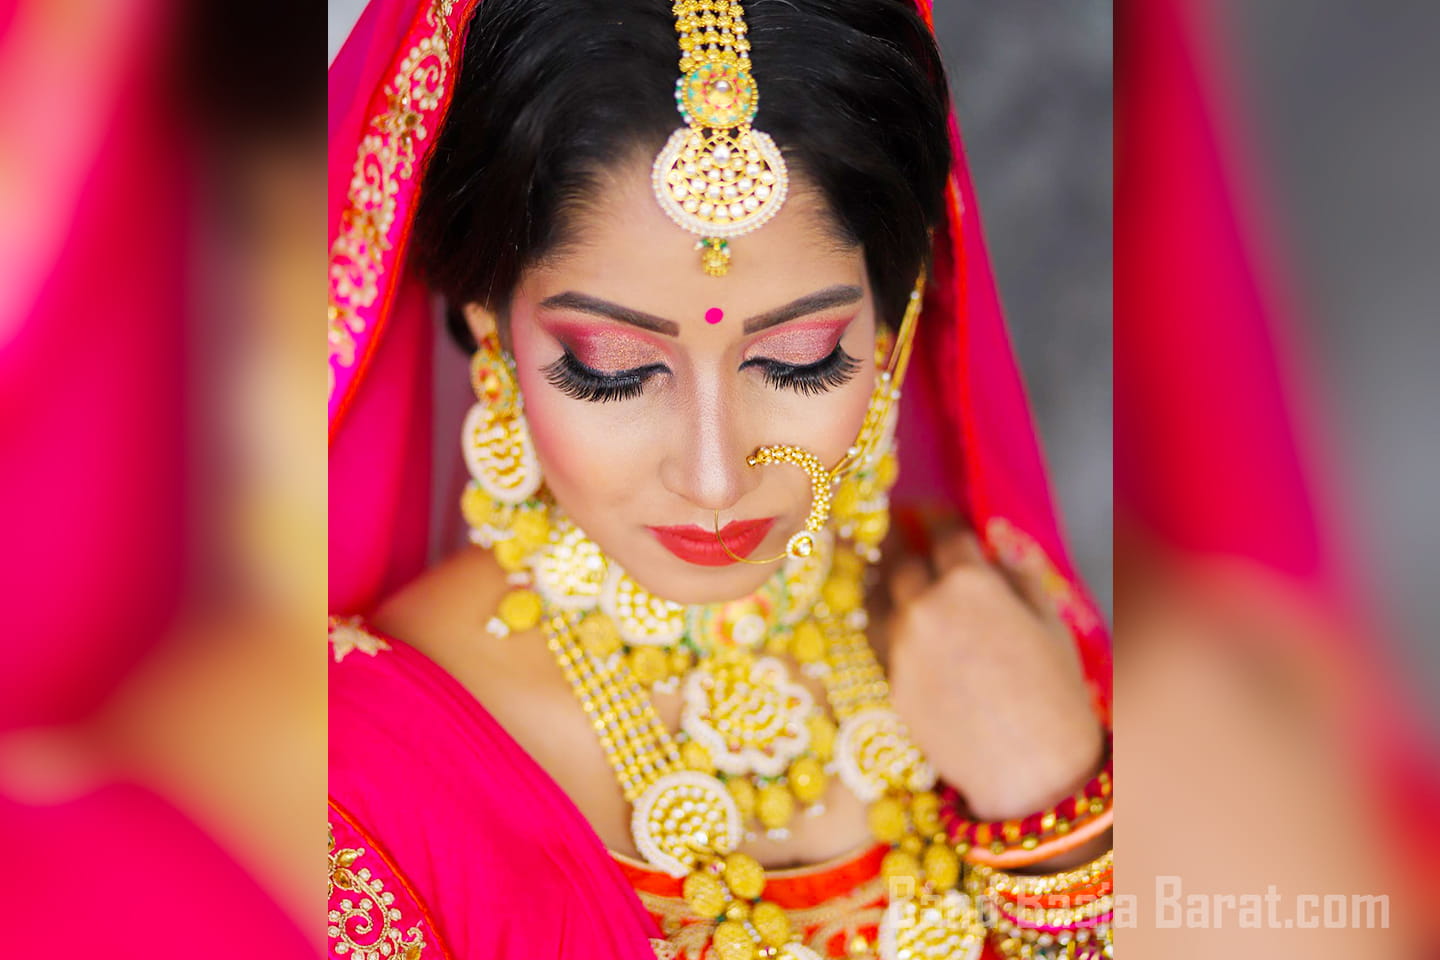 makeup by Rehance The Bridal Studio